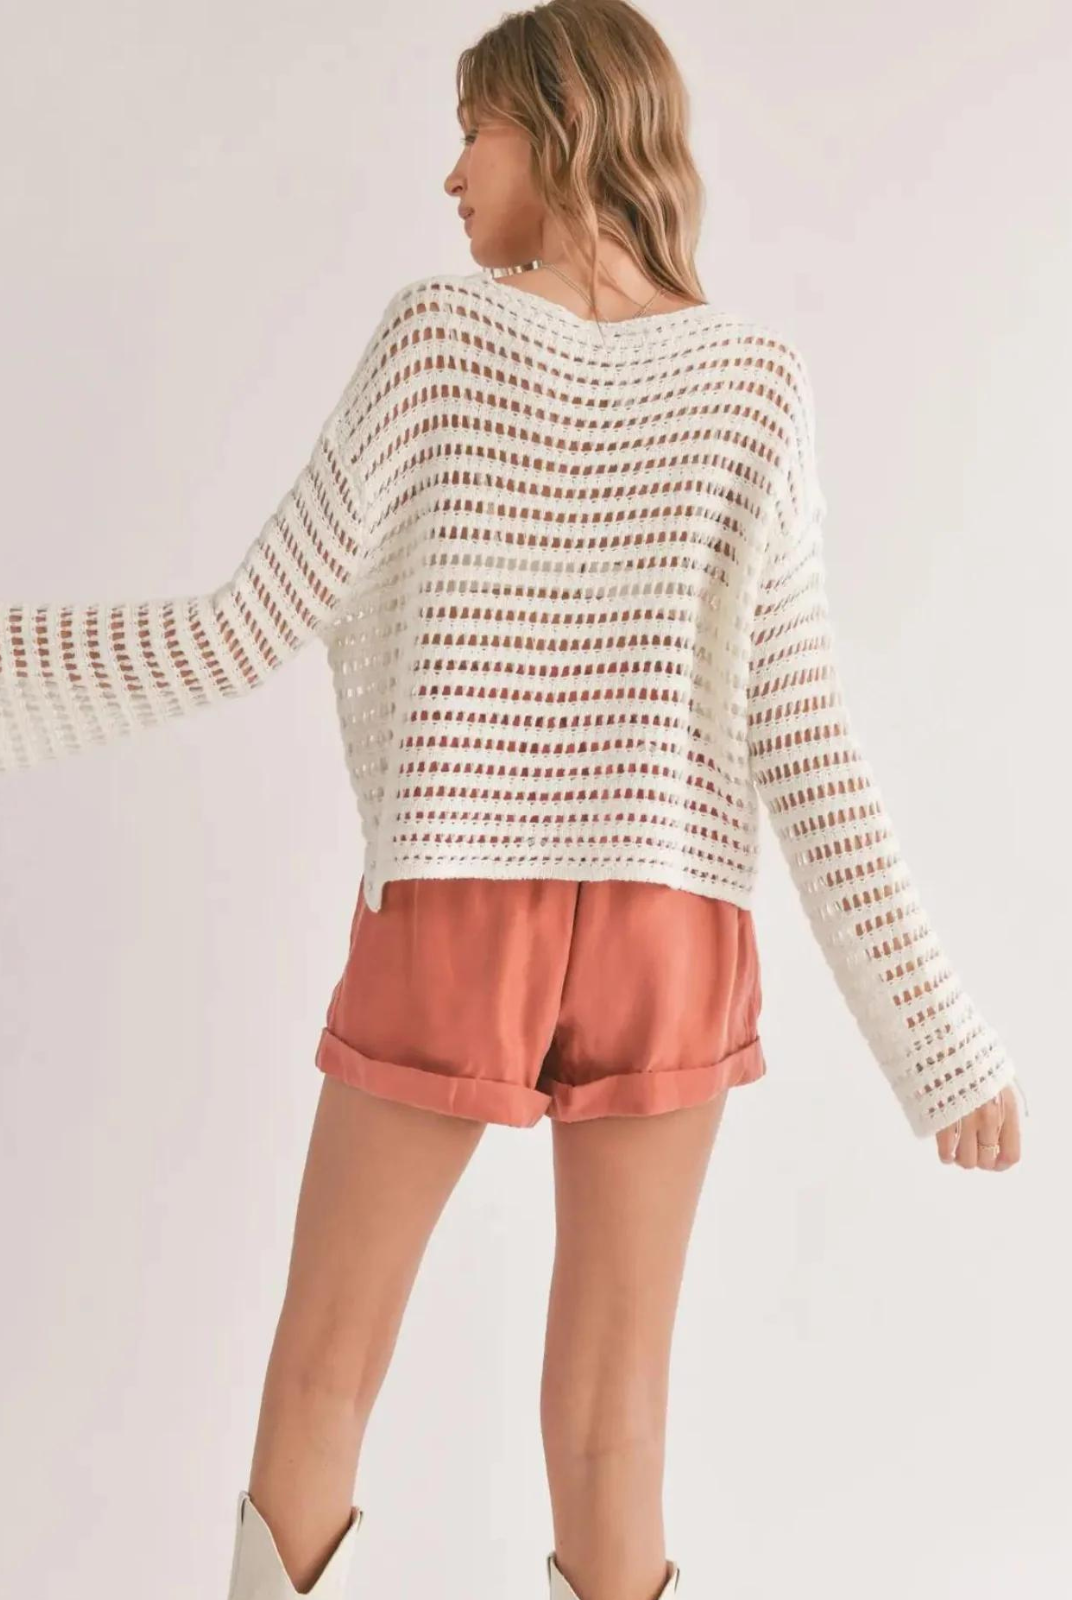 Sadie & Sage Carlita Open Knit Sweater - White. This open knit sweater is perfect for chilly days or evenings. The lightweight material keeps you comfortably warm, while the unique open knit pattern adds a touch of sophistication. The long sleeves offer both style and coverage, and the loose fit allows for unrestricted movement. A versatile piece that can be worn solo or layered, this sweater is a must-have for any fashion-forward wardrobe.